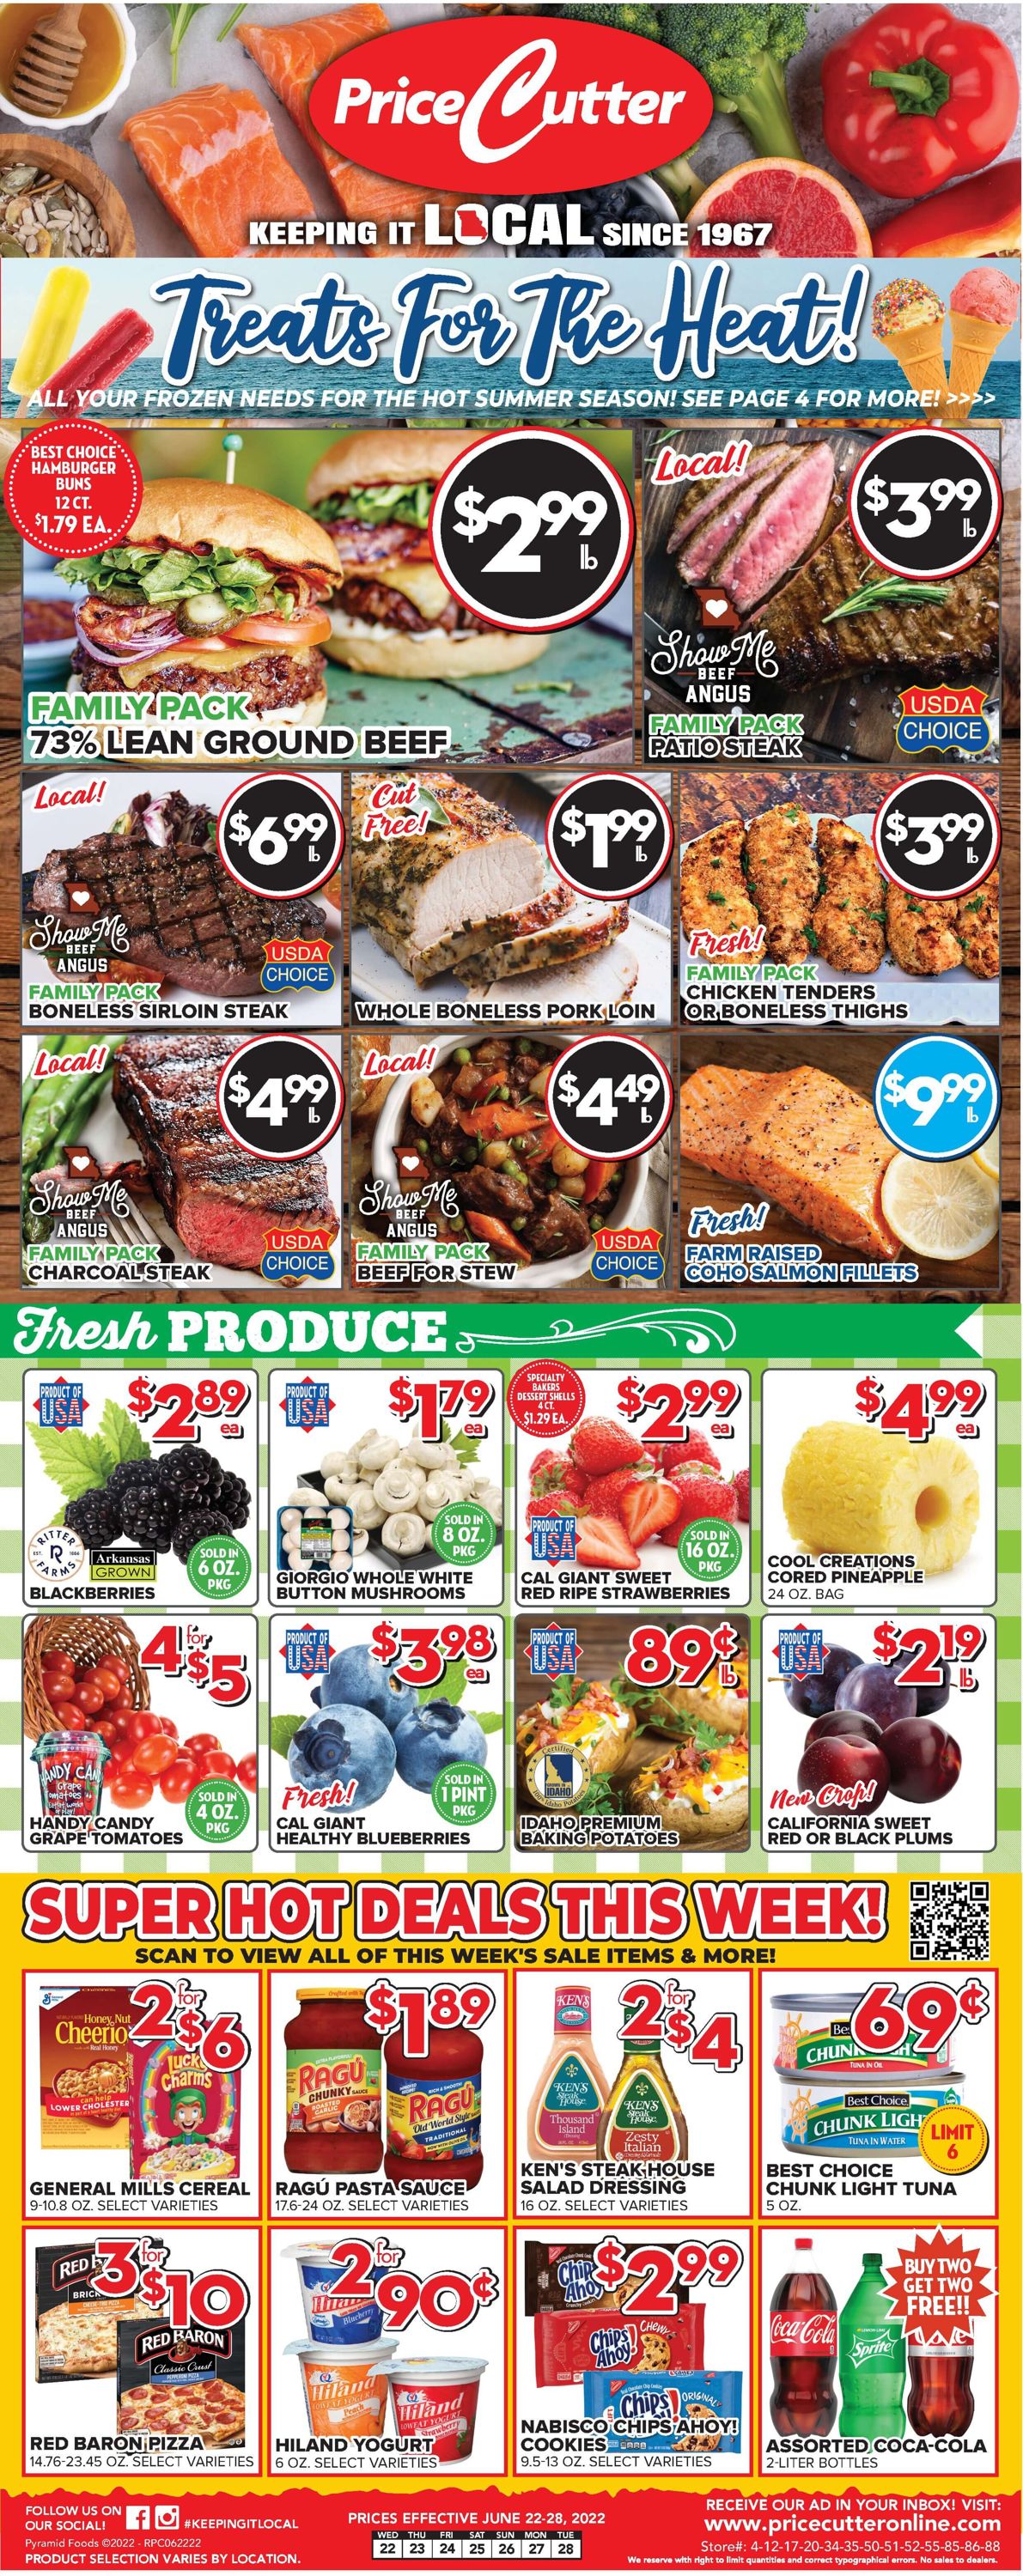 Price Cutter Weekly Ad Circular - valid 06/22-06/28/2022